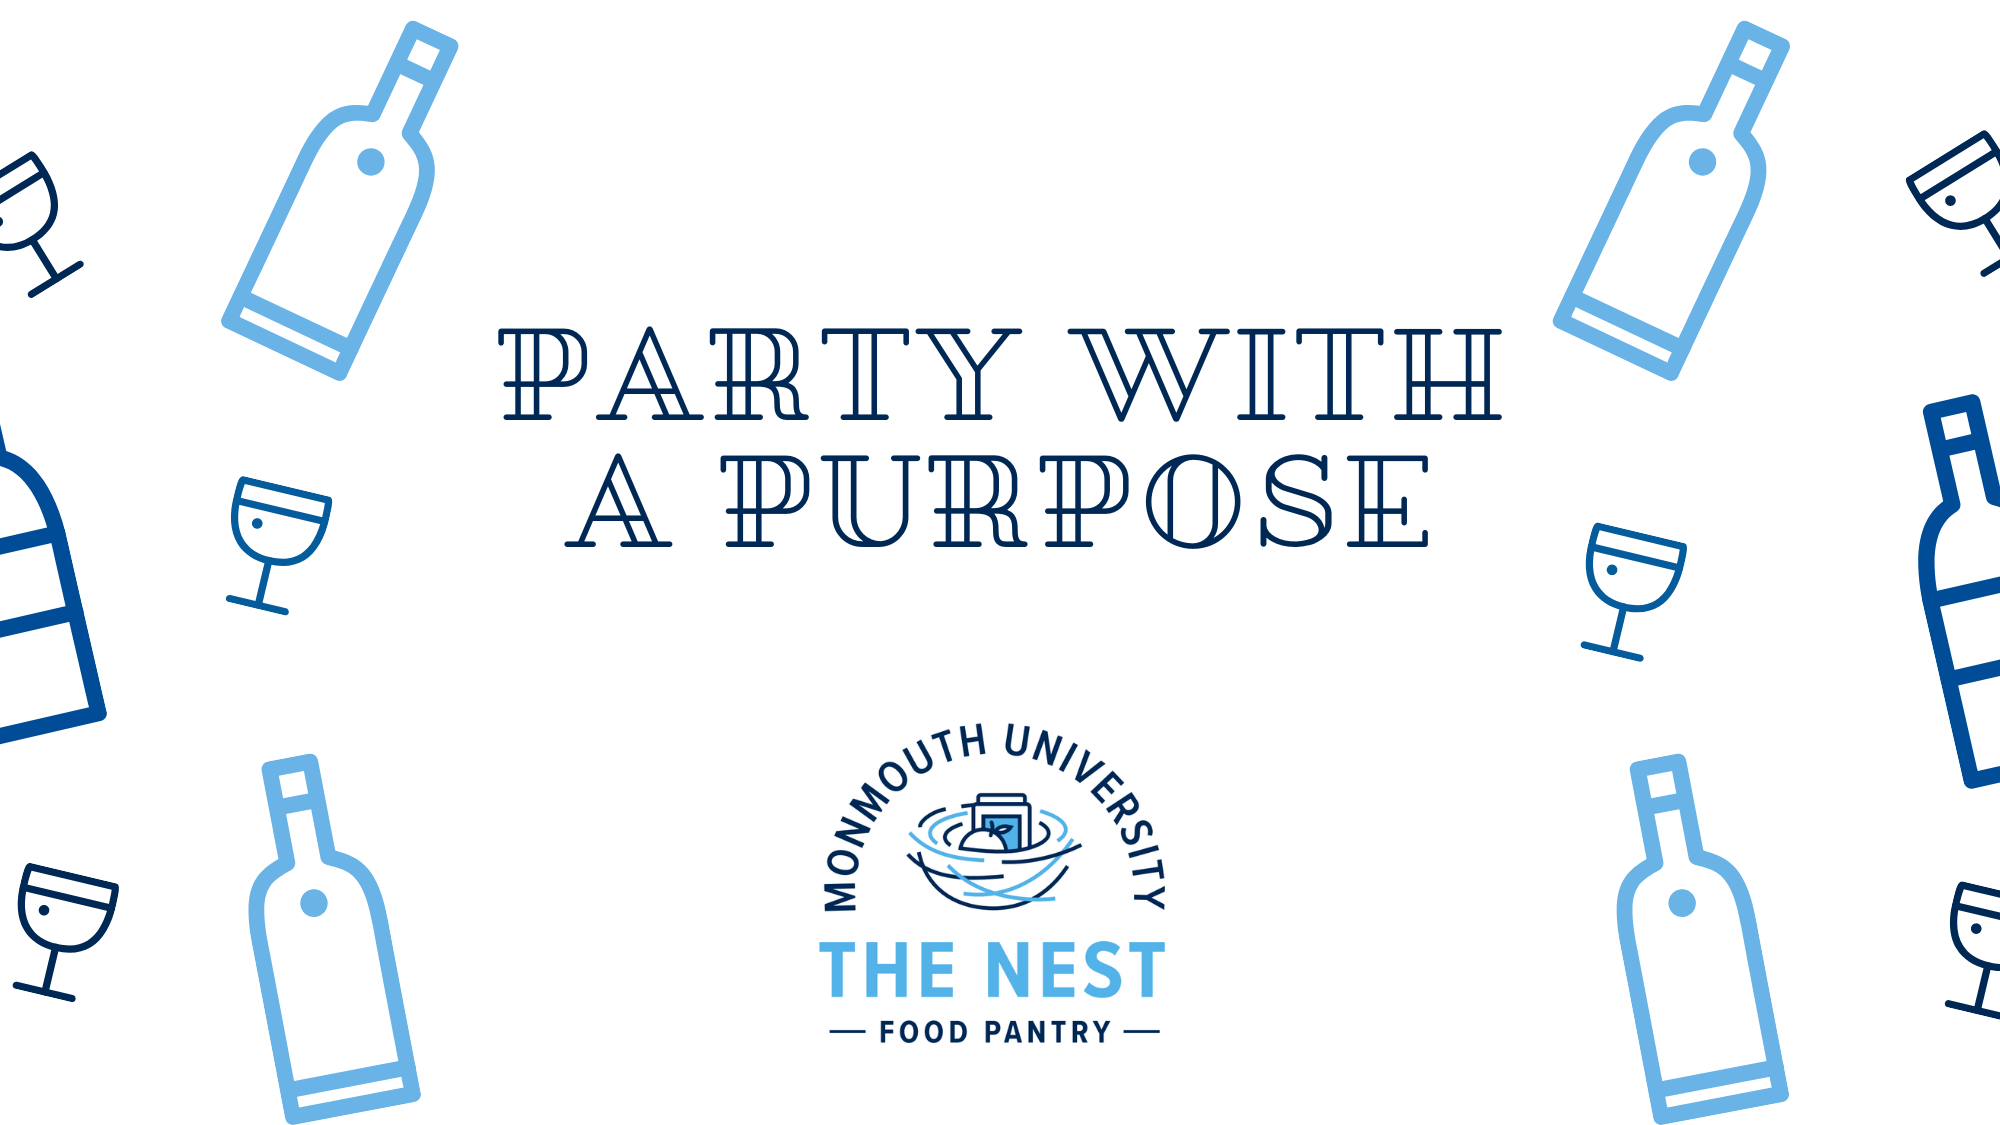 Party with a Purpose (The NEST Food Pantry)